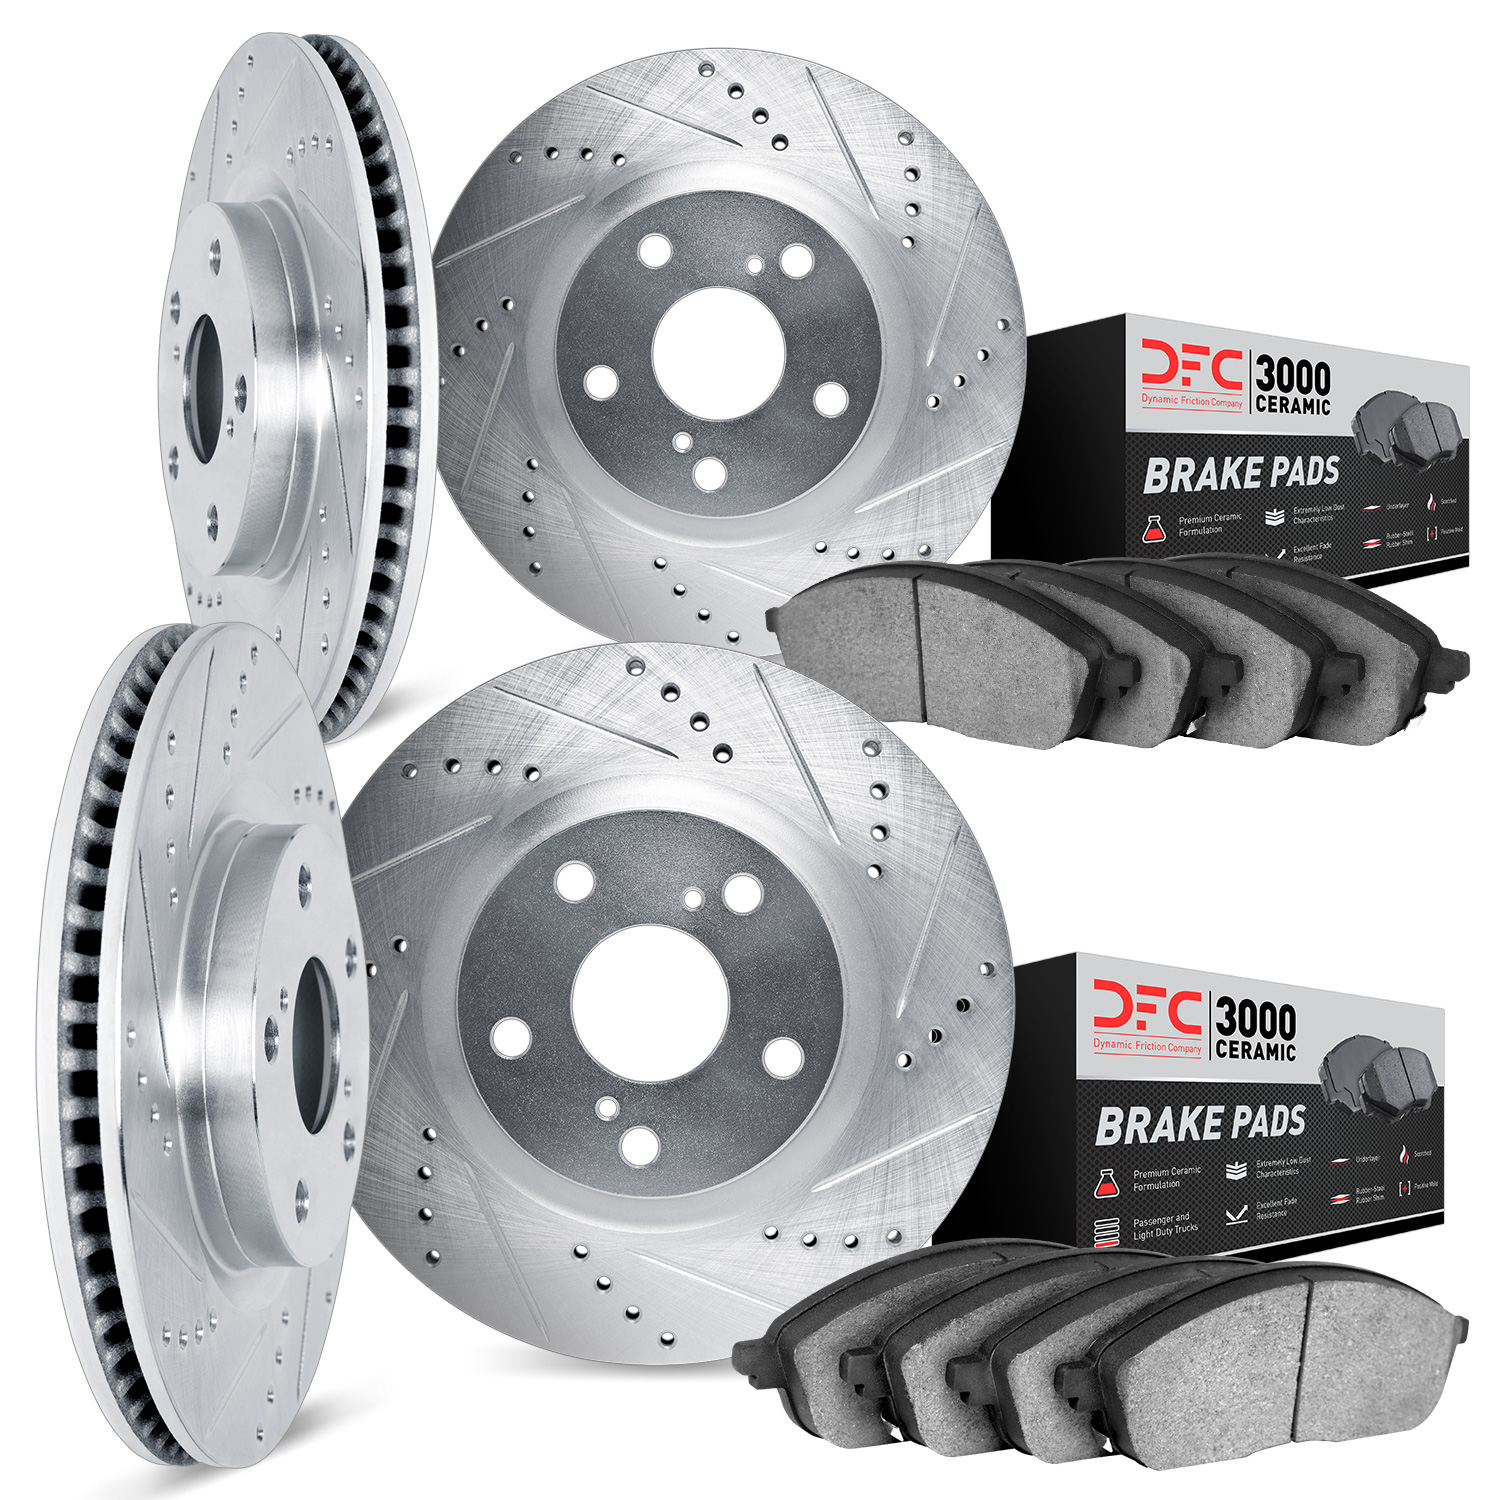 7304-80013 Drilled/Slotted Brake Rotor with 3000-Series Ceramic Brake Pads Kit [Silver], 1996-1998 Ford/Lincoln/Mercury/Mazda, P